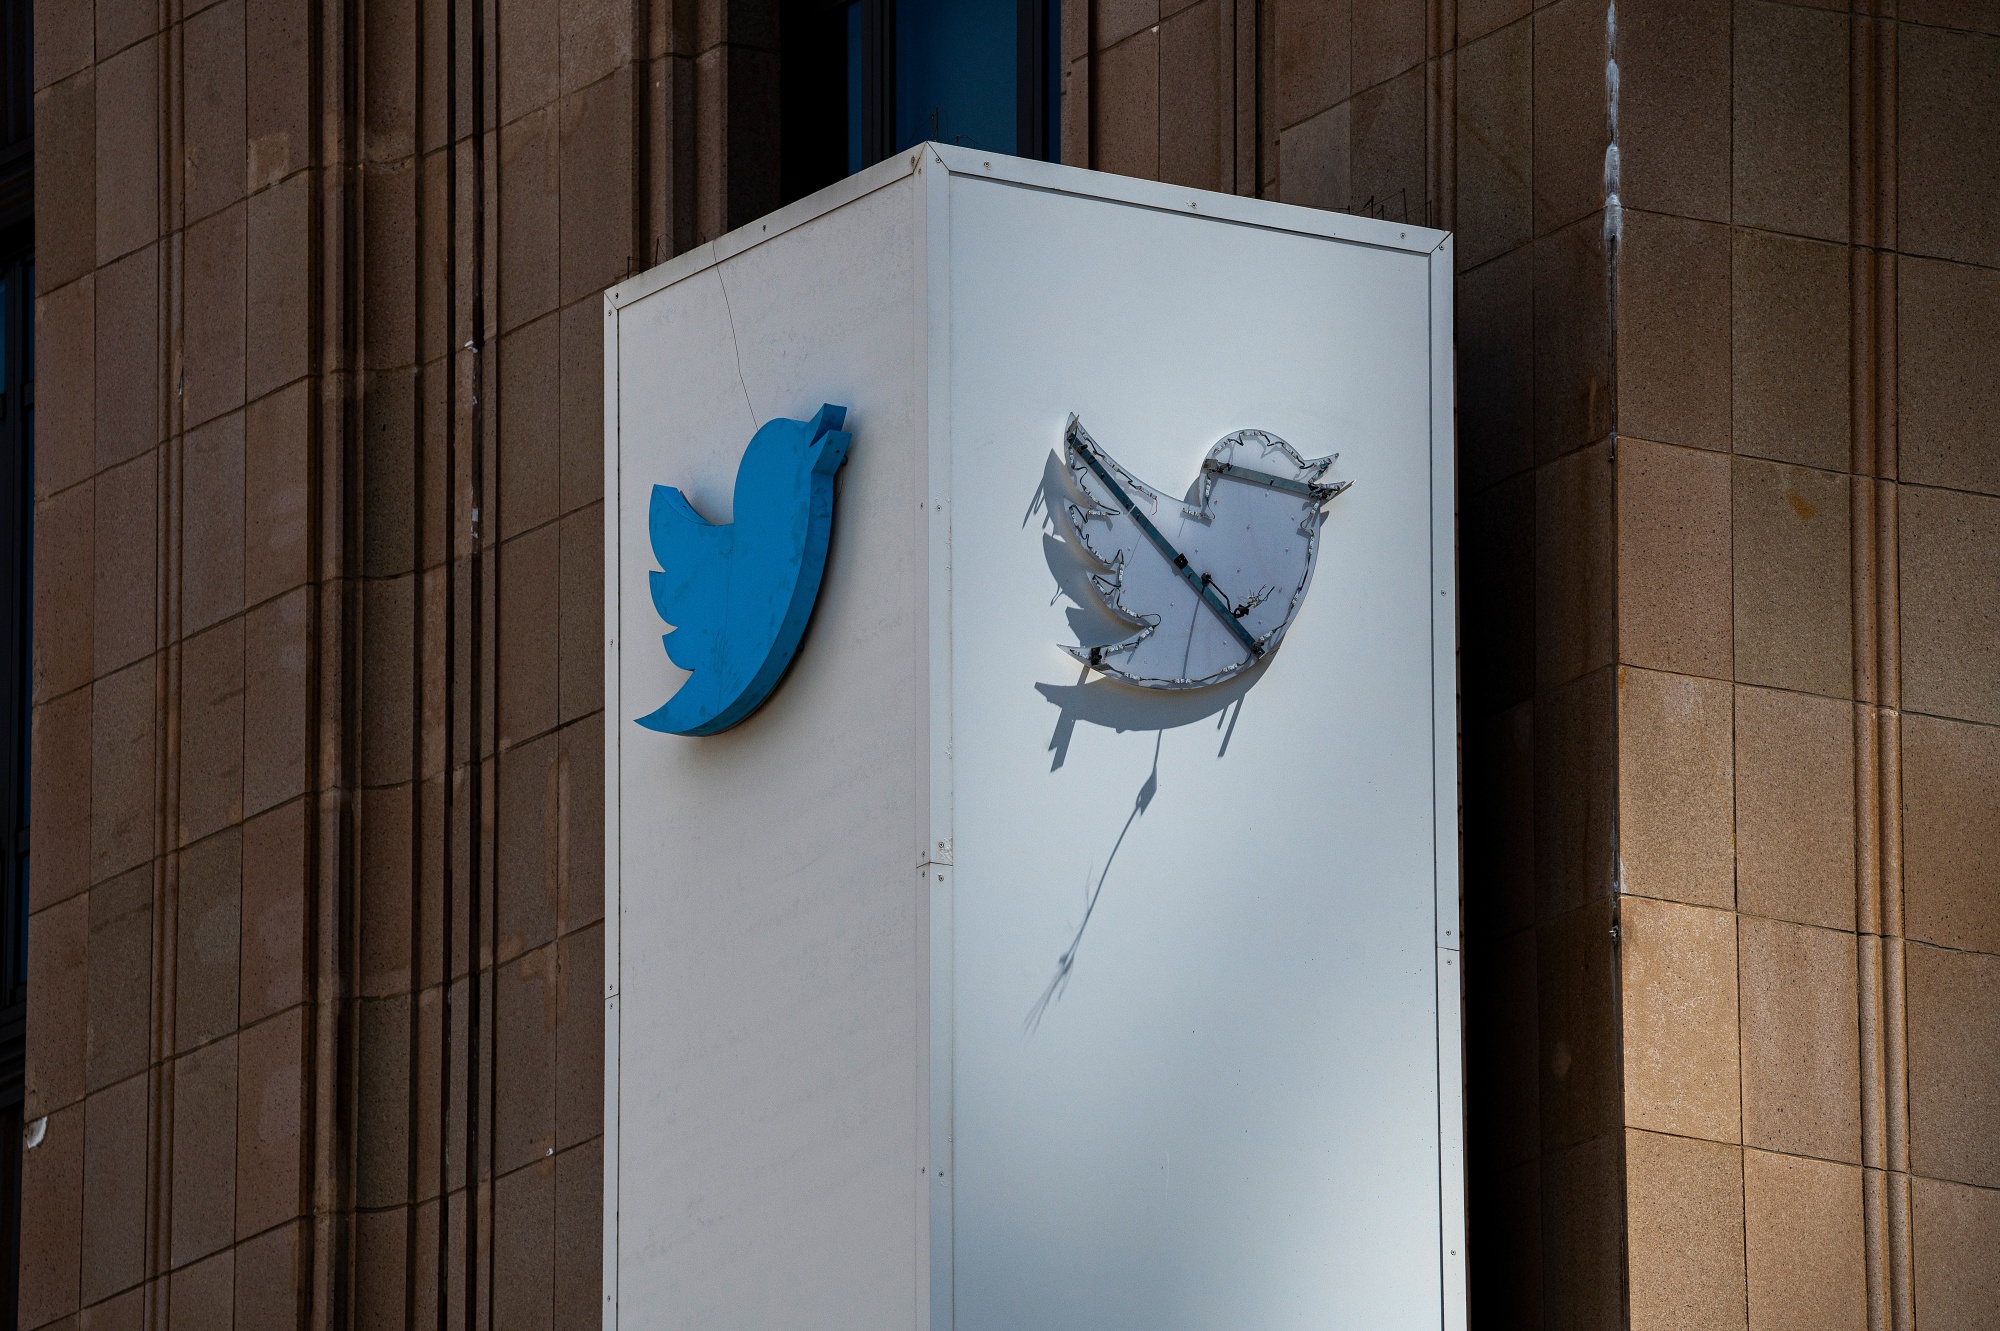 Twitter Has Bigger Problems Than Its Rebrand to X